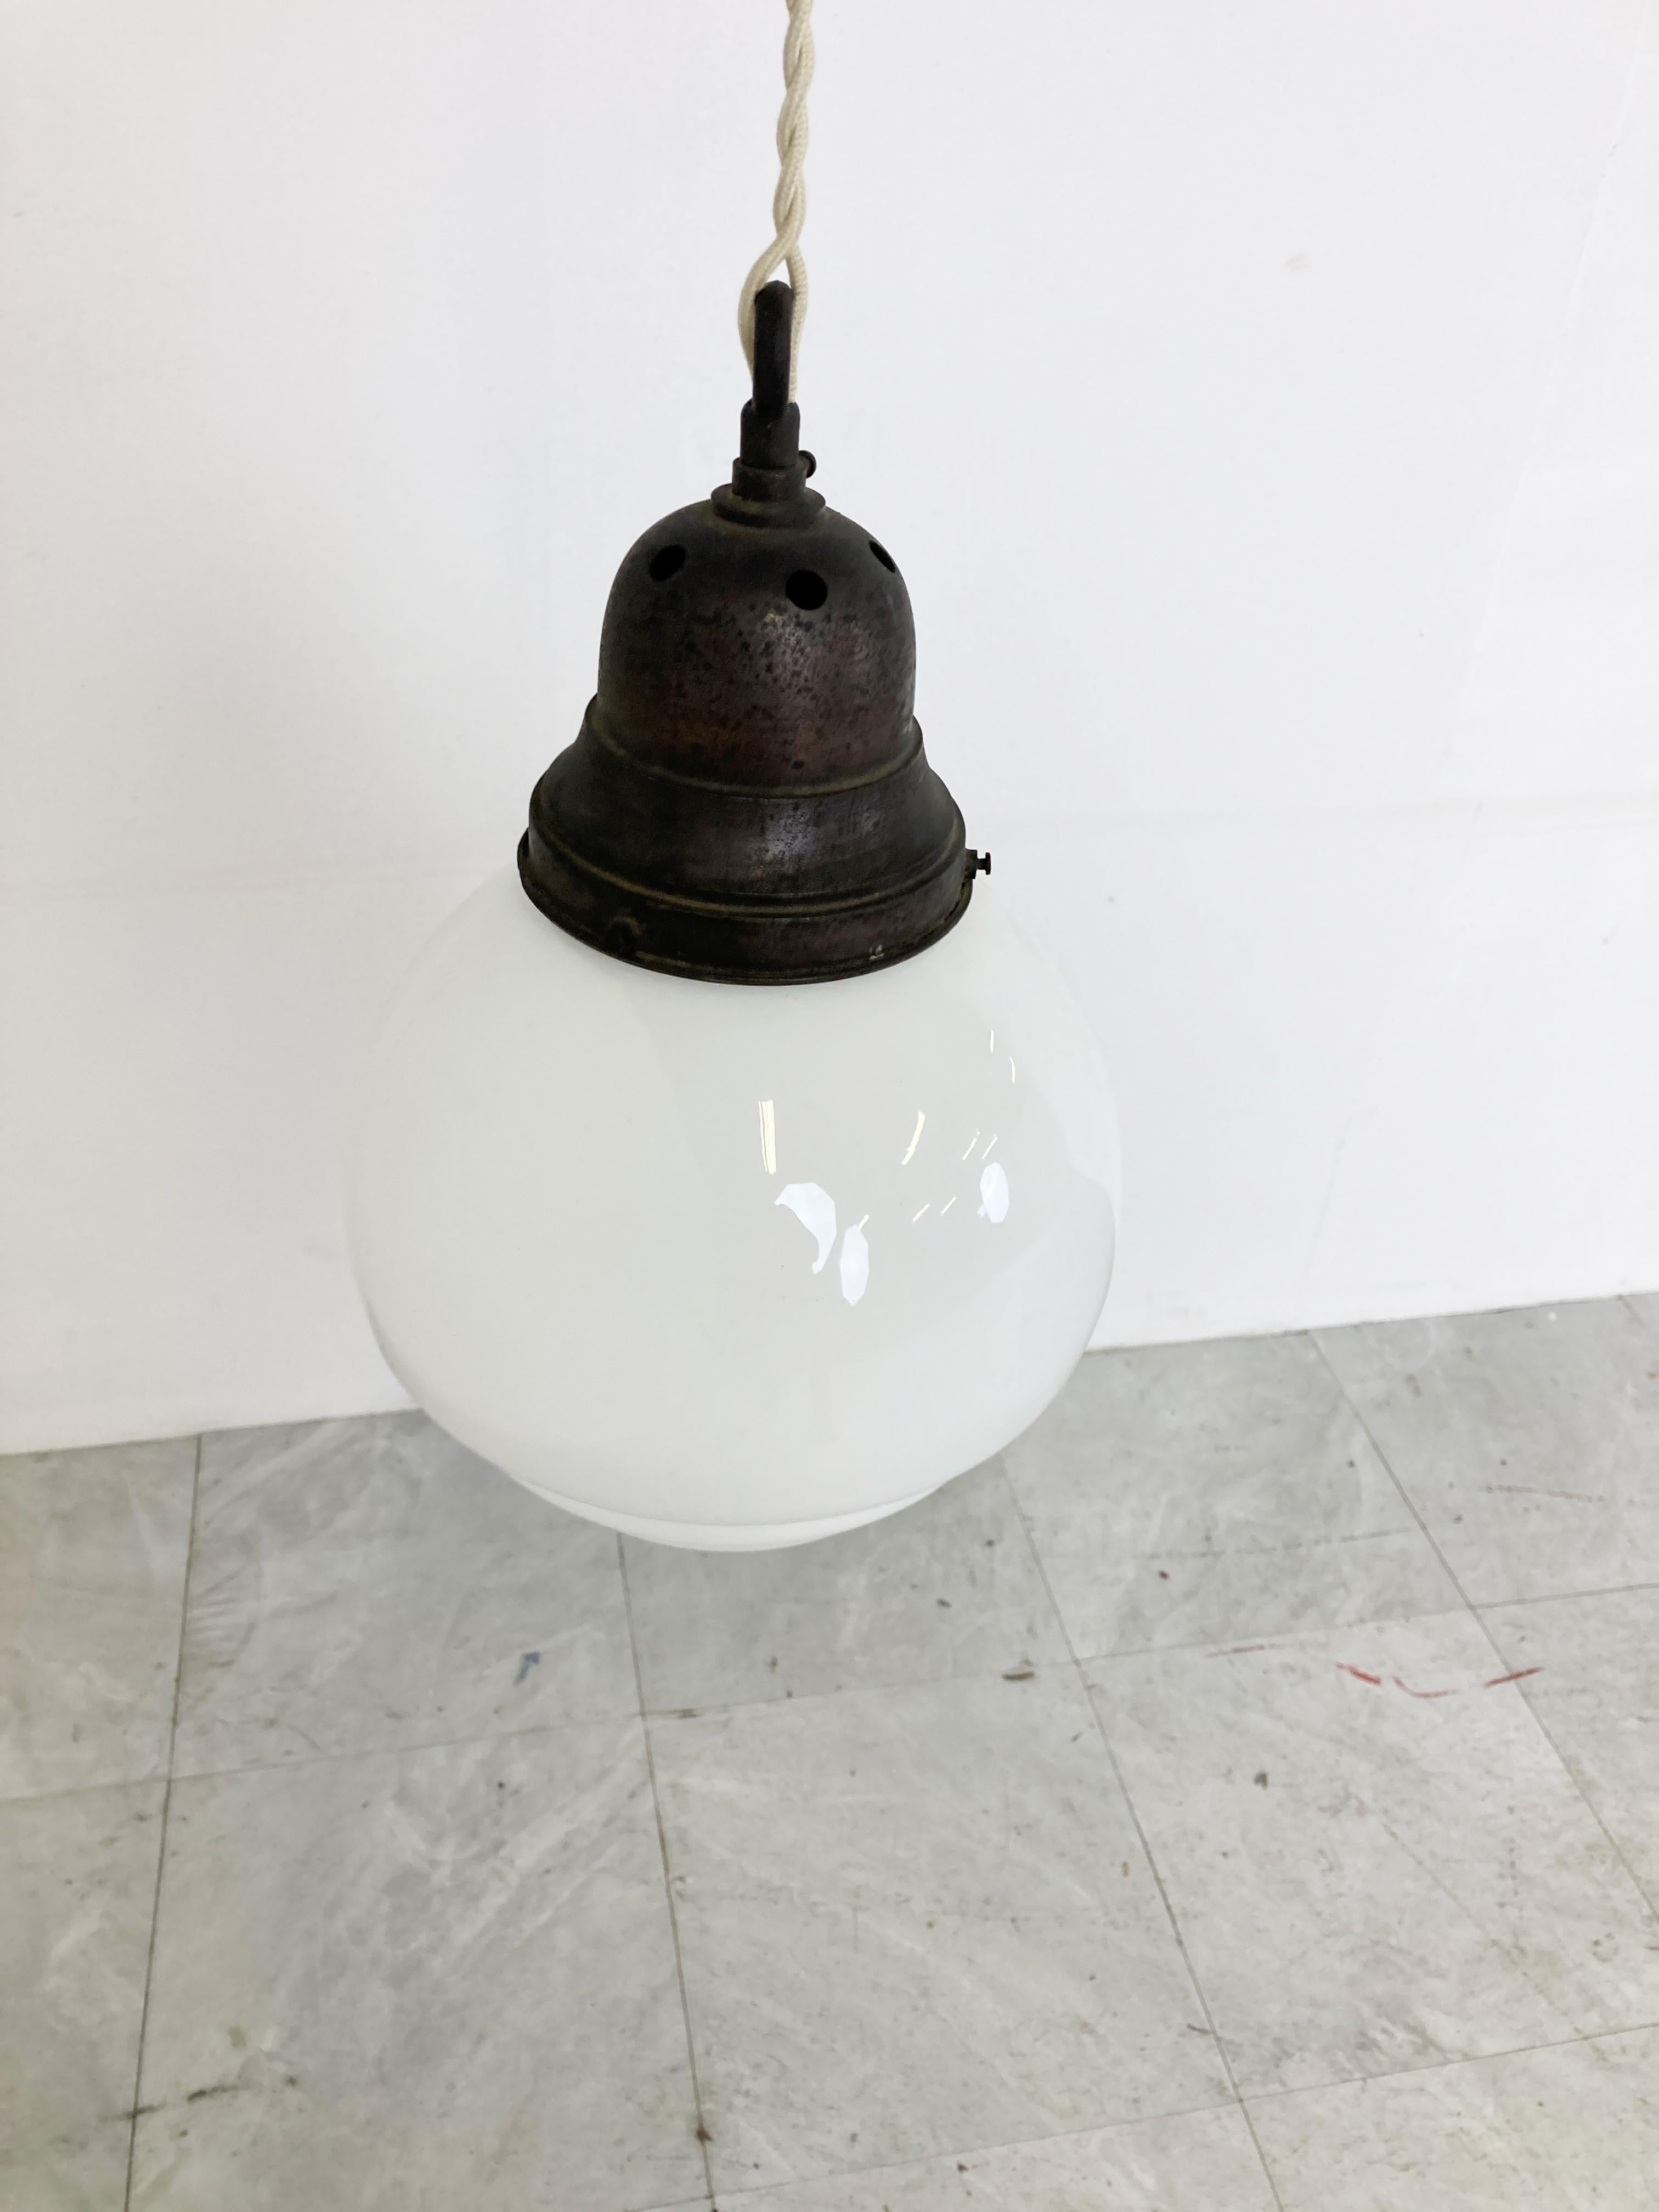 Antique stepped art deco hallway pendant light.

This lamp is very typical for the art deco era and were widely used to be hung in hallways, offices or larger public places.

The lamp has the original copper dome shaped hade holder.

The shade